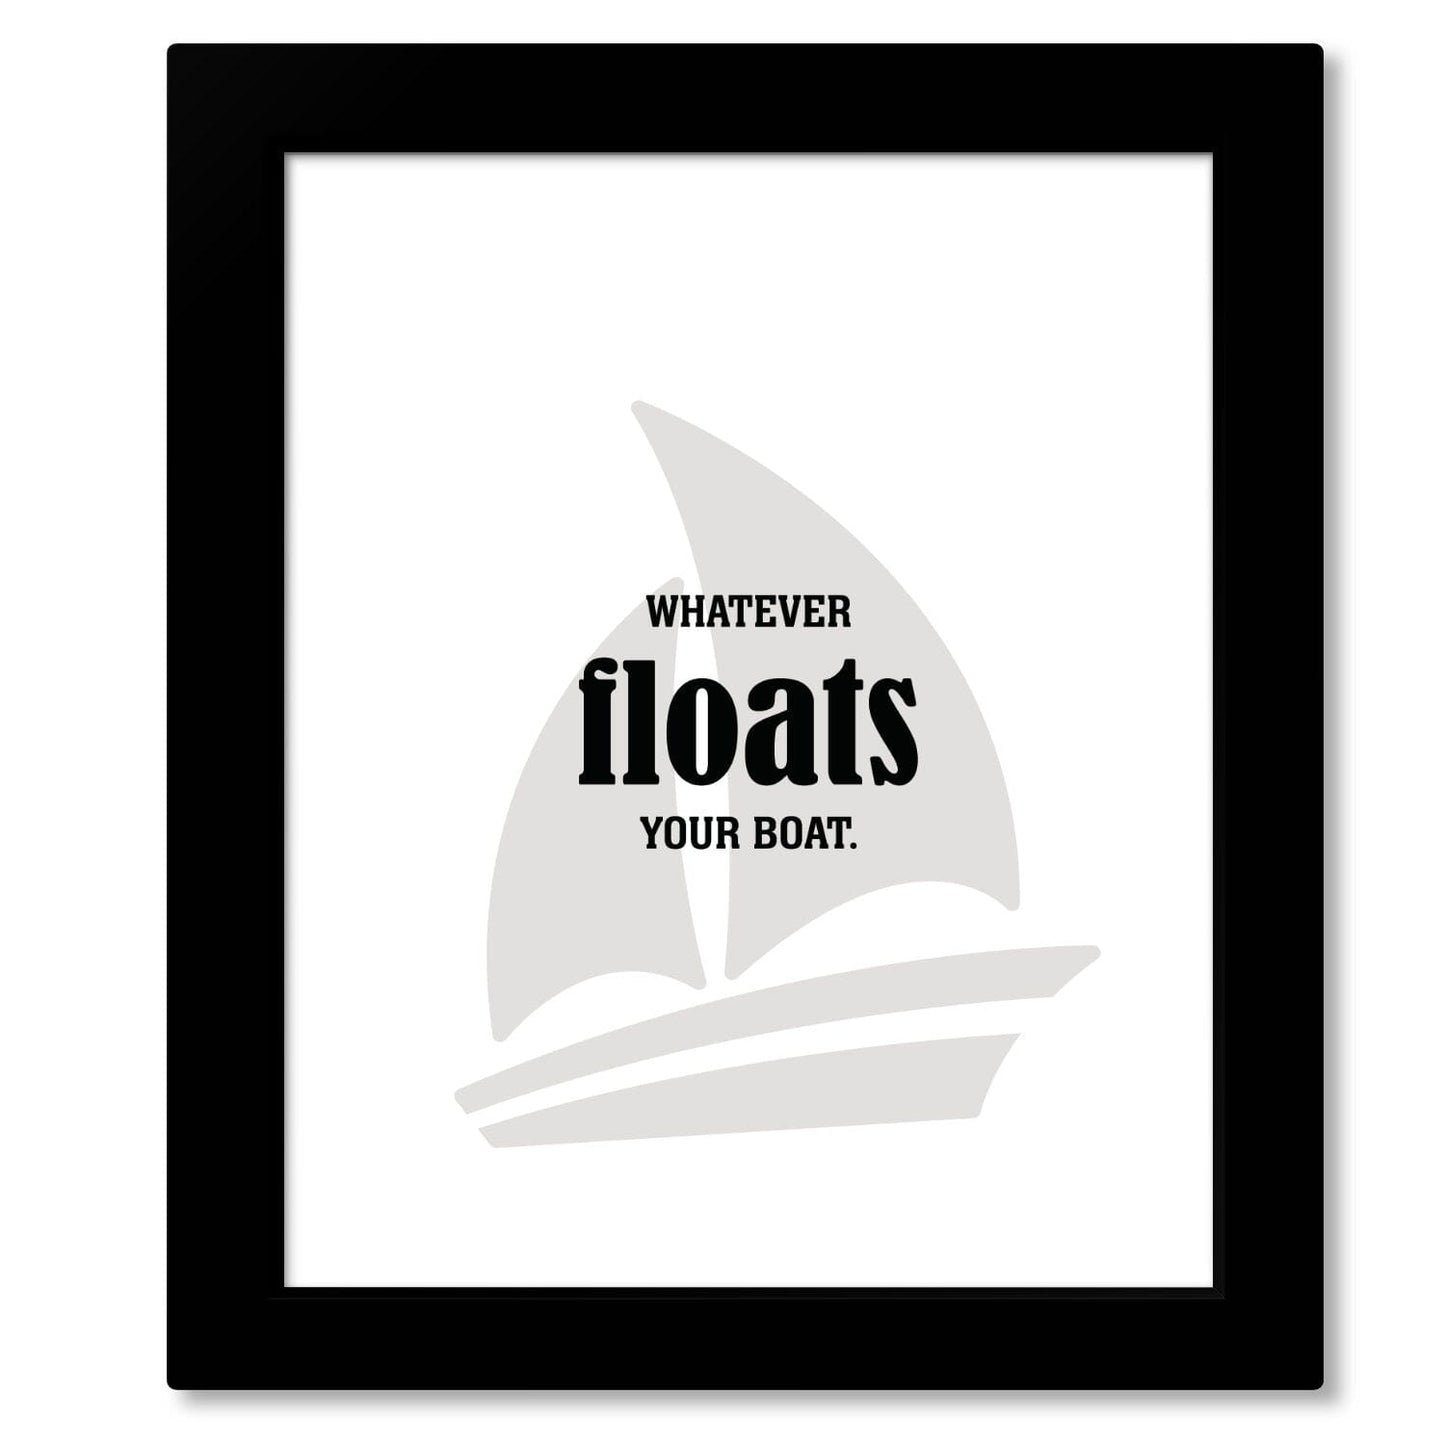 Whatever Floats Your Boat - Wise and Witty Wall Print Art Wise and Wiseass Quotes Song Lyrics Art 8x10 Framed Print (without Mat) 